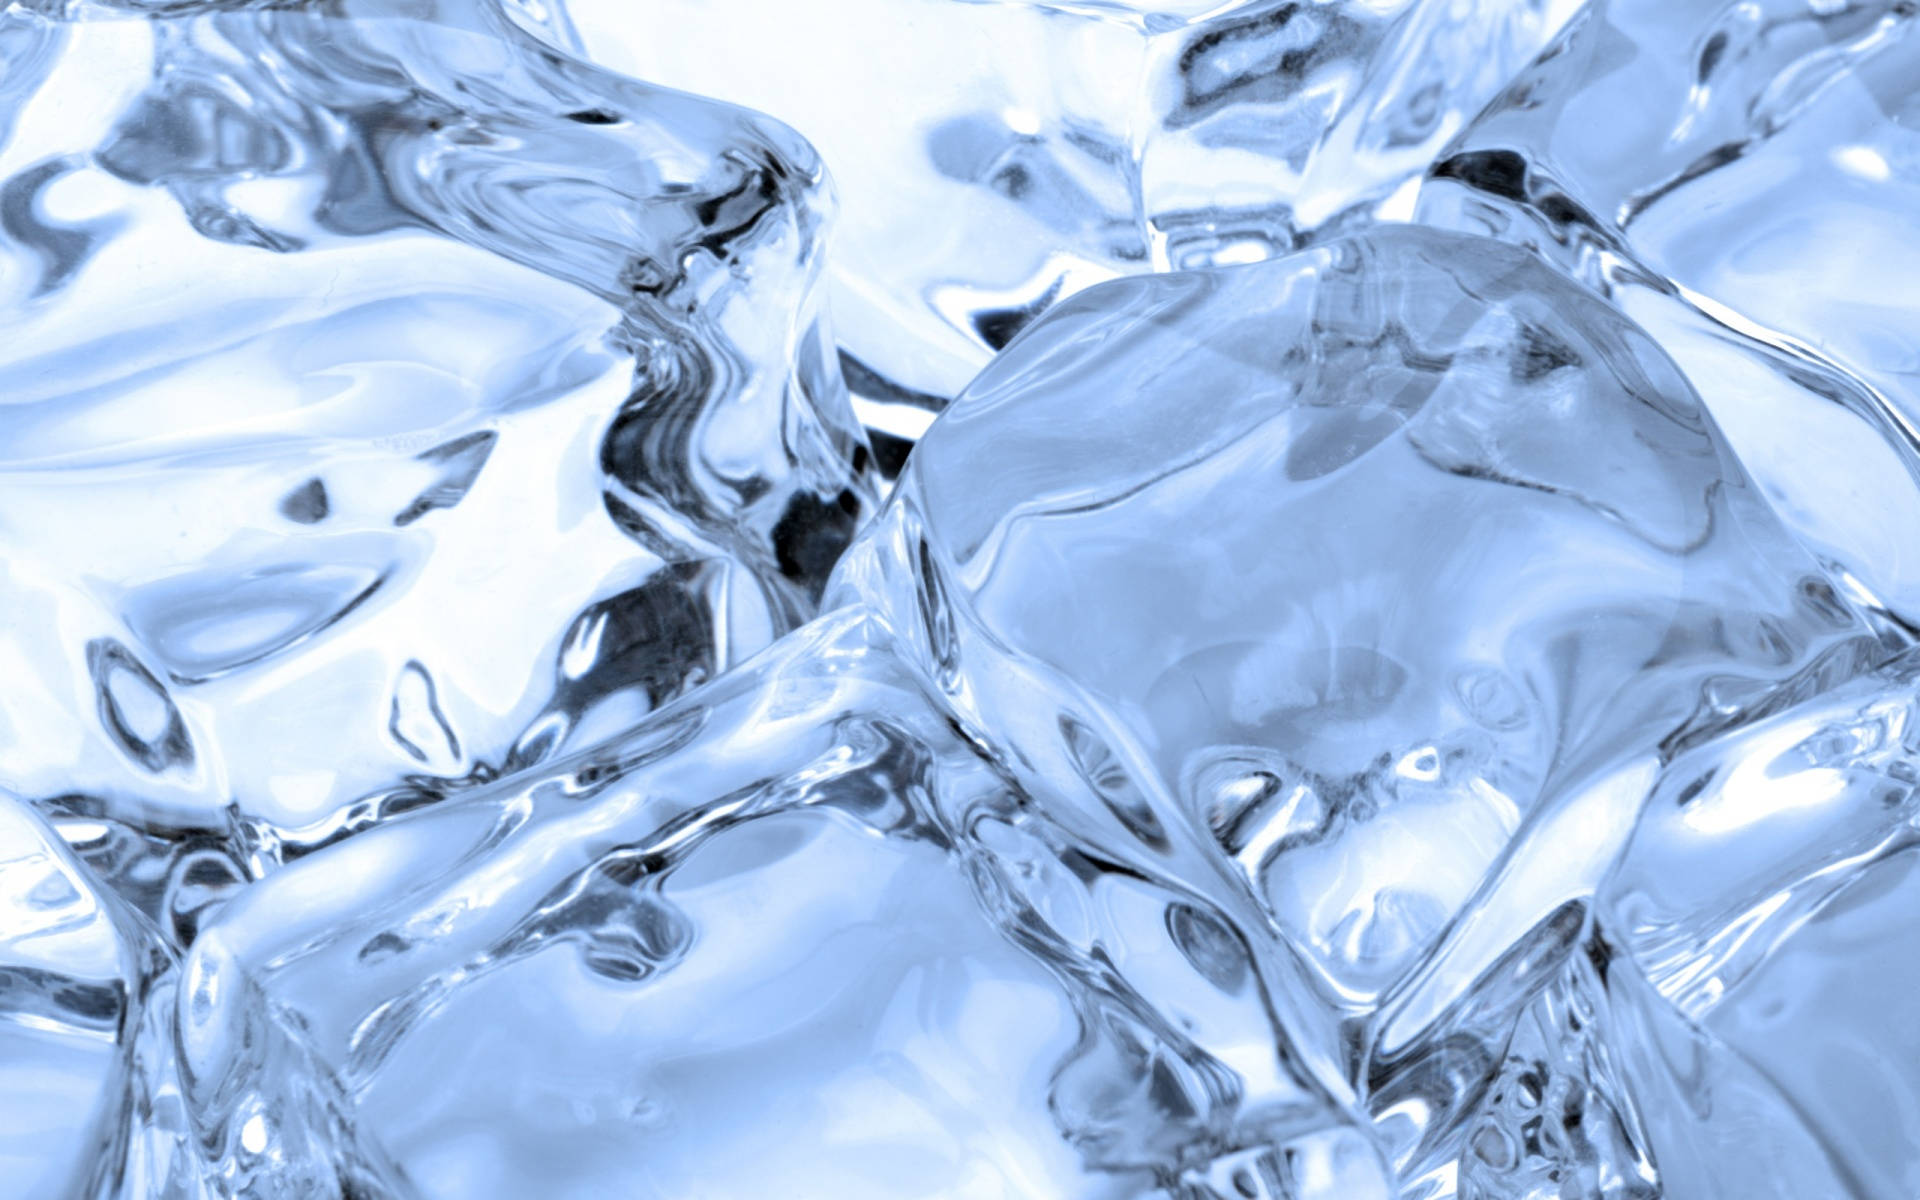 The Frozen Art - An Up-Close View of a Transparent Ice Cube Wallpaper